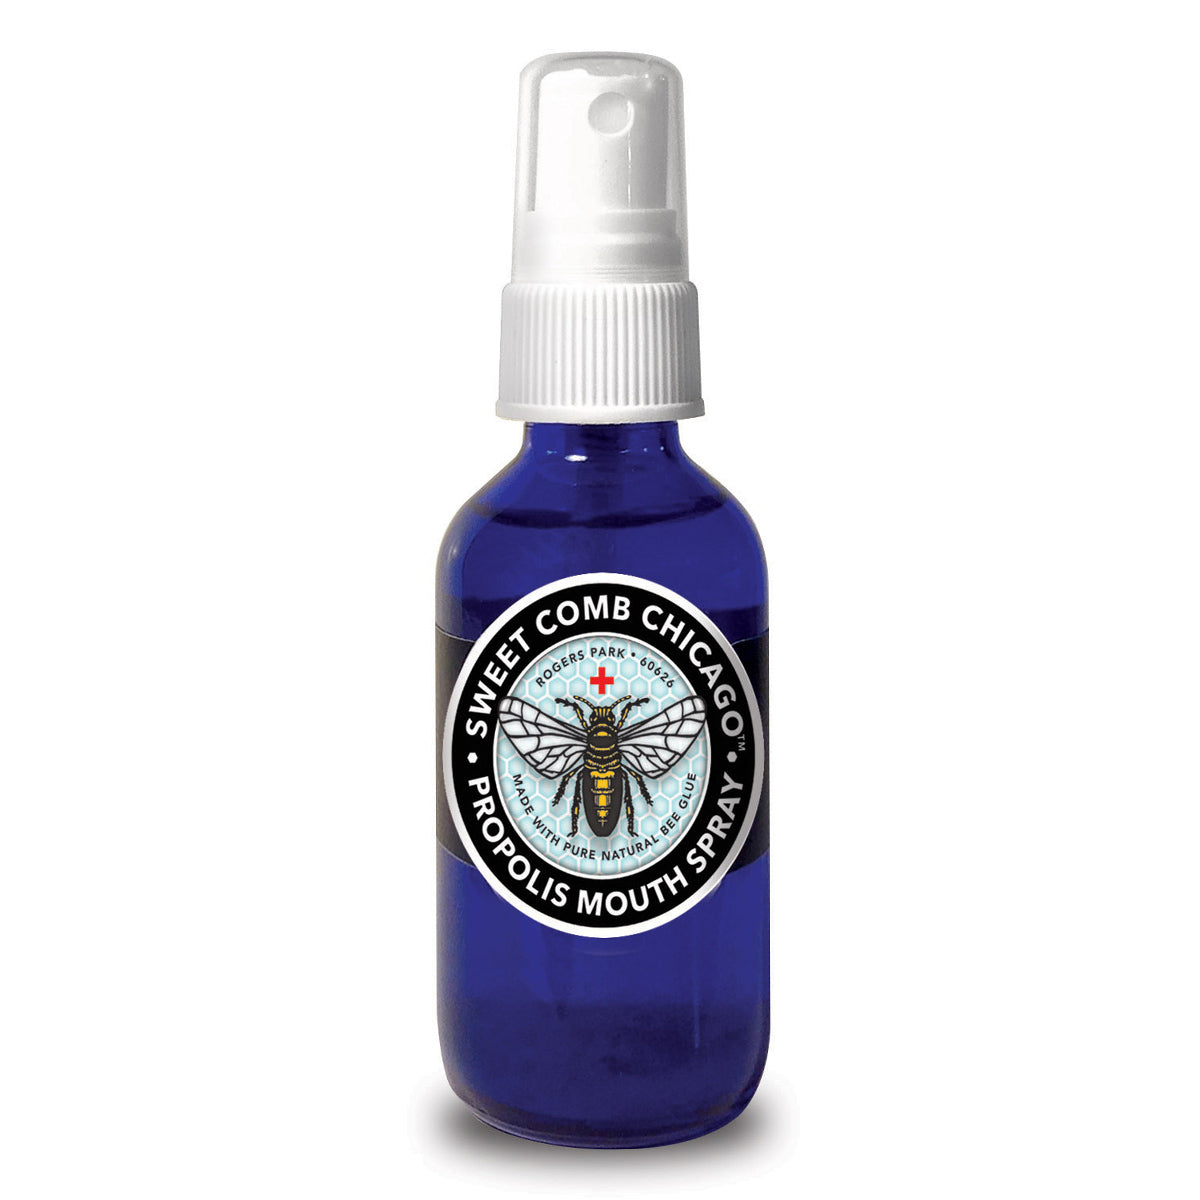 Primary image of Propolis Mouth Spray